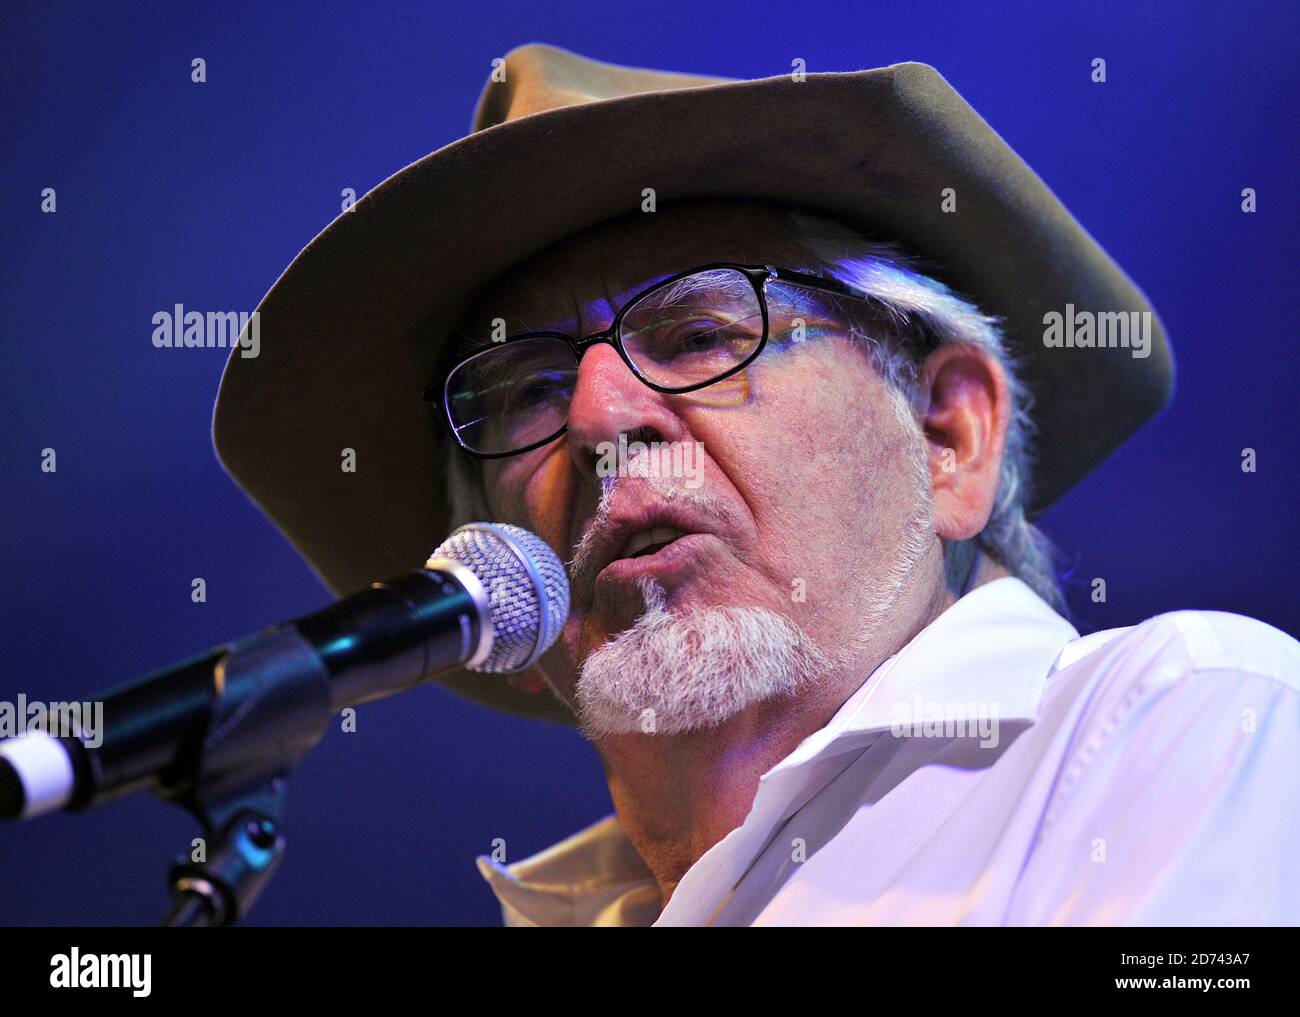 Rolf Harris performs on the final day of the Womad Festival, in Malmesbury in Wiltshire. Picture date: 25 July 2010. M Crossick/EMPICS Stock Photo